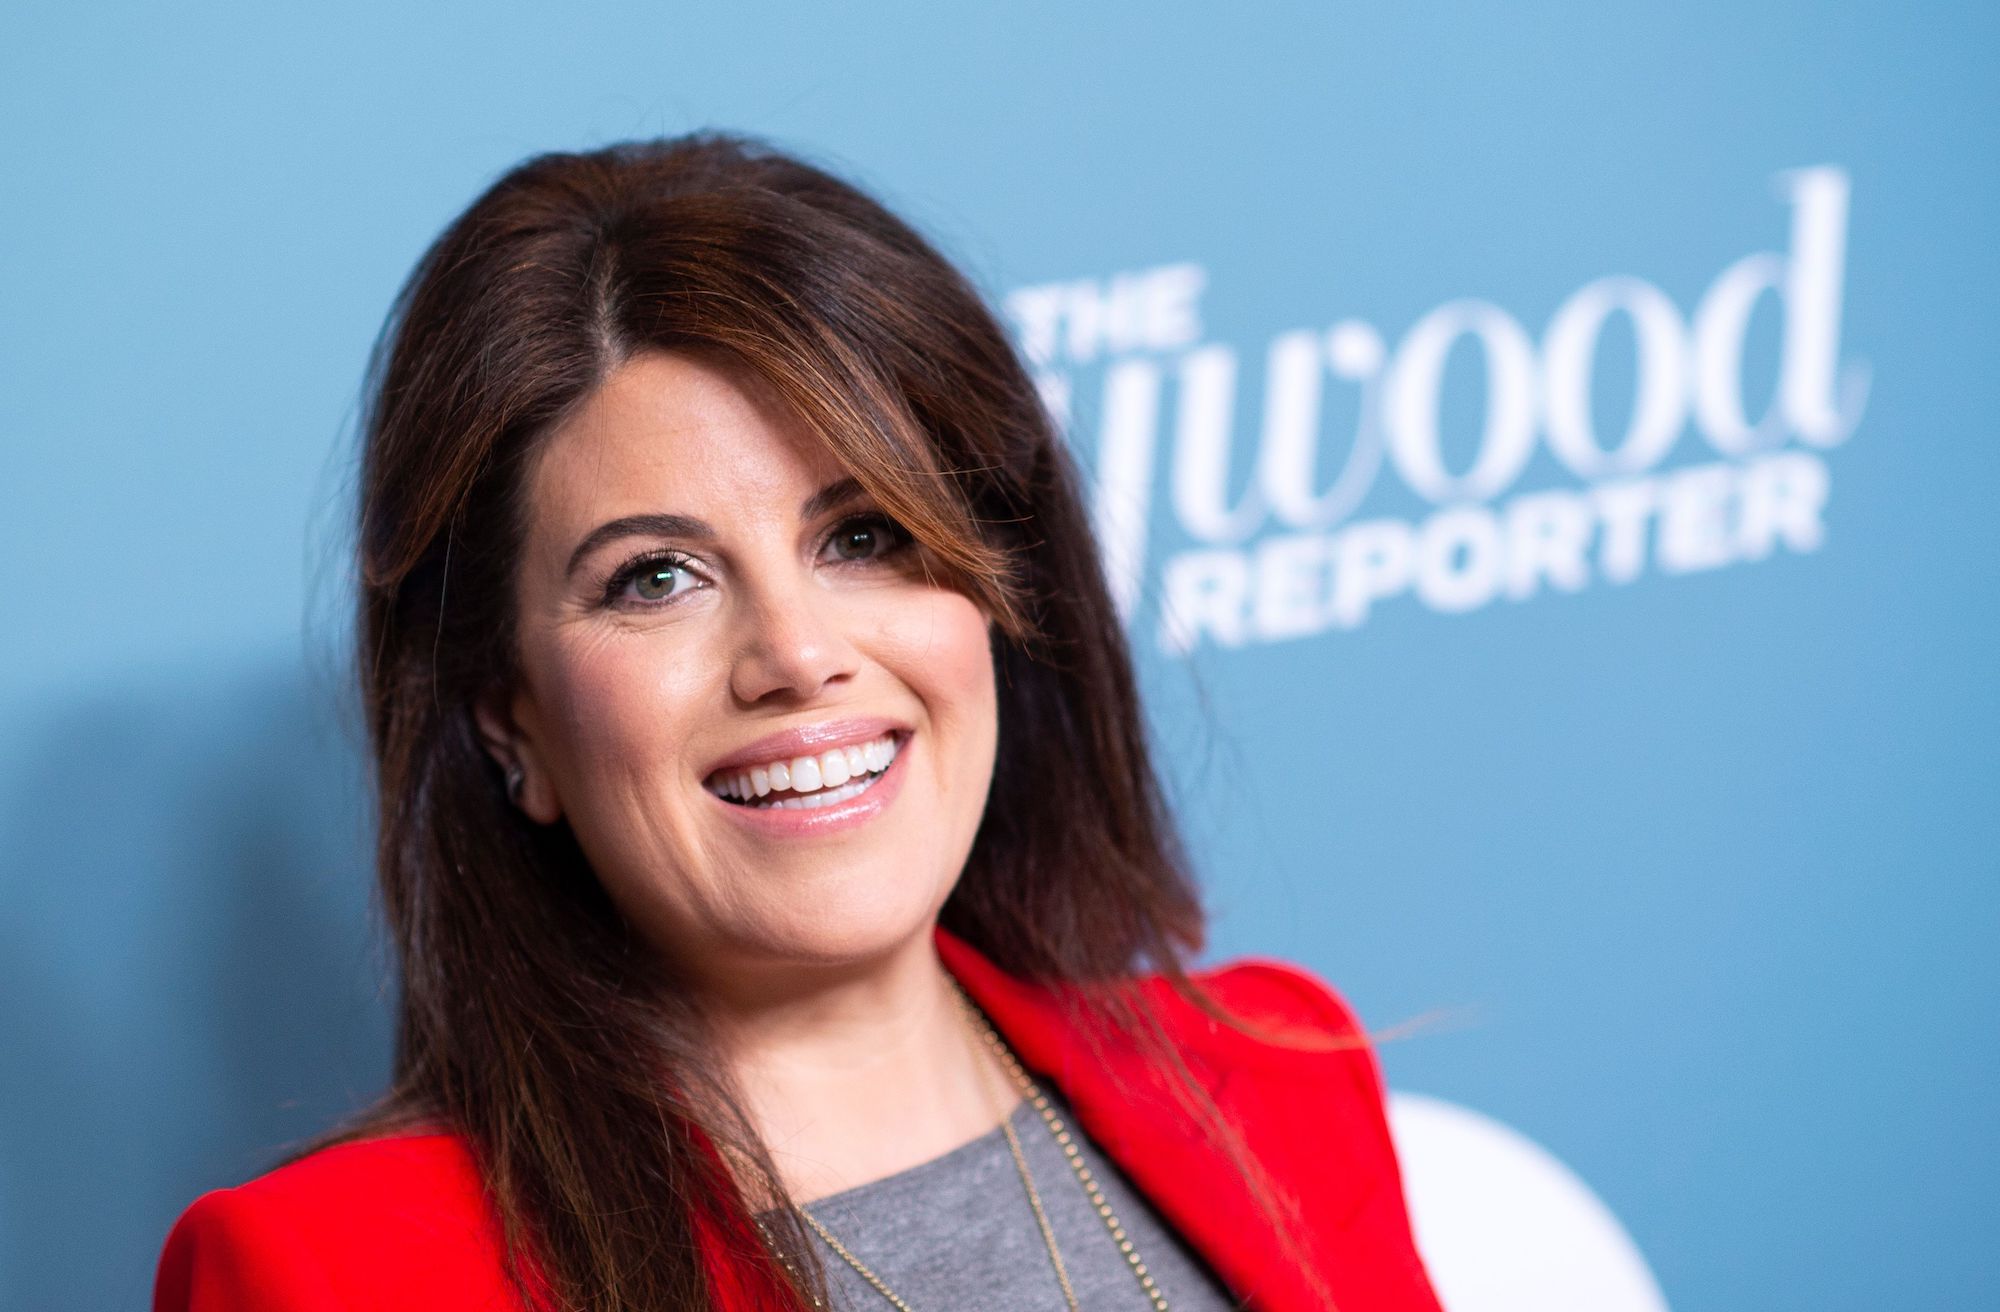 Monica Lewinsky attending The Hollywood Reporter's Power 100 Women in Entertainment event in 2018